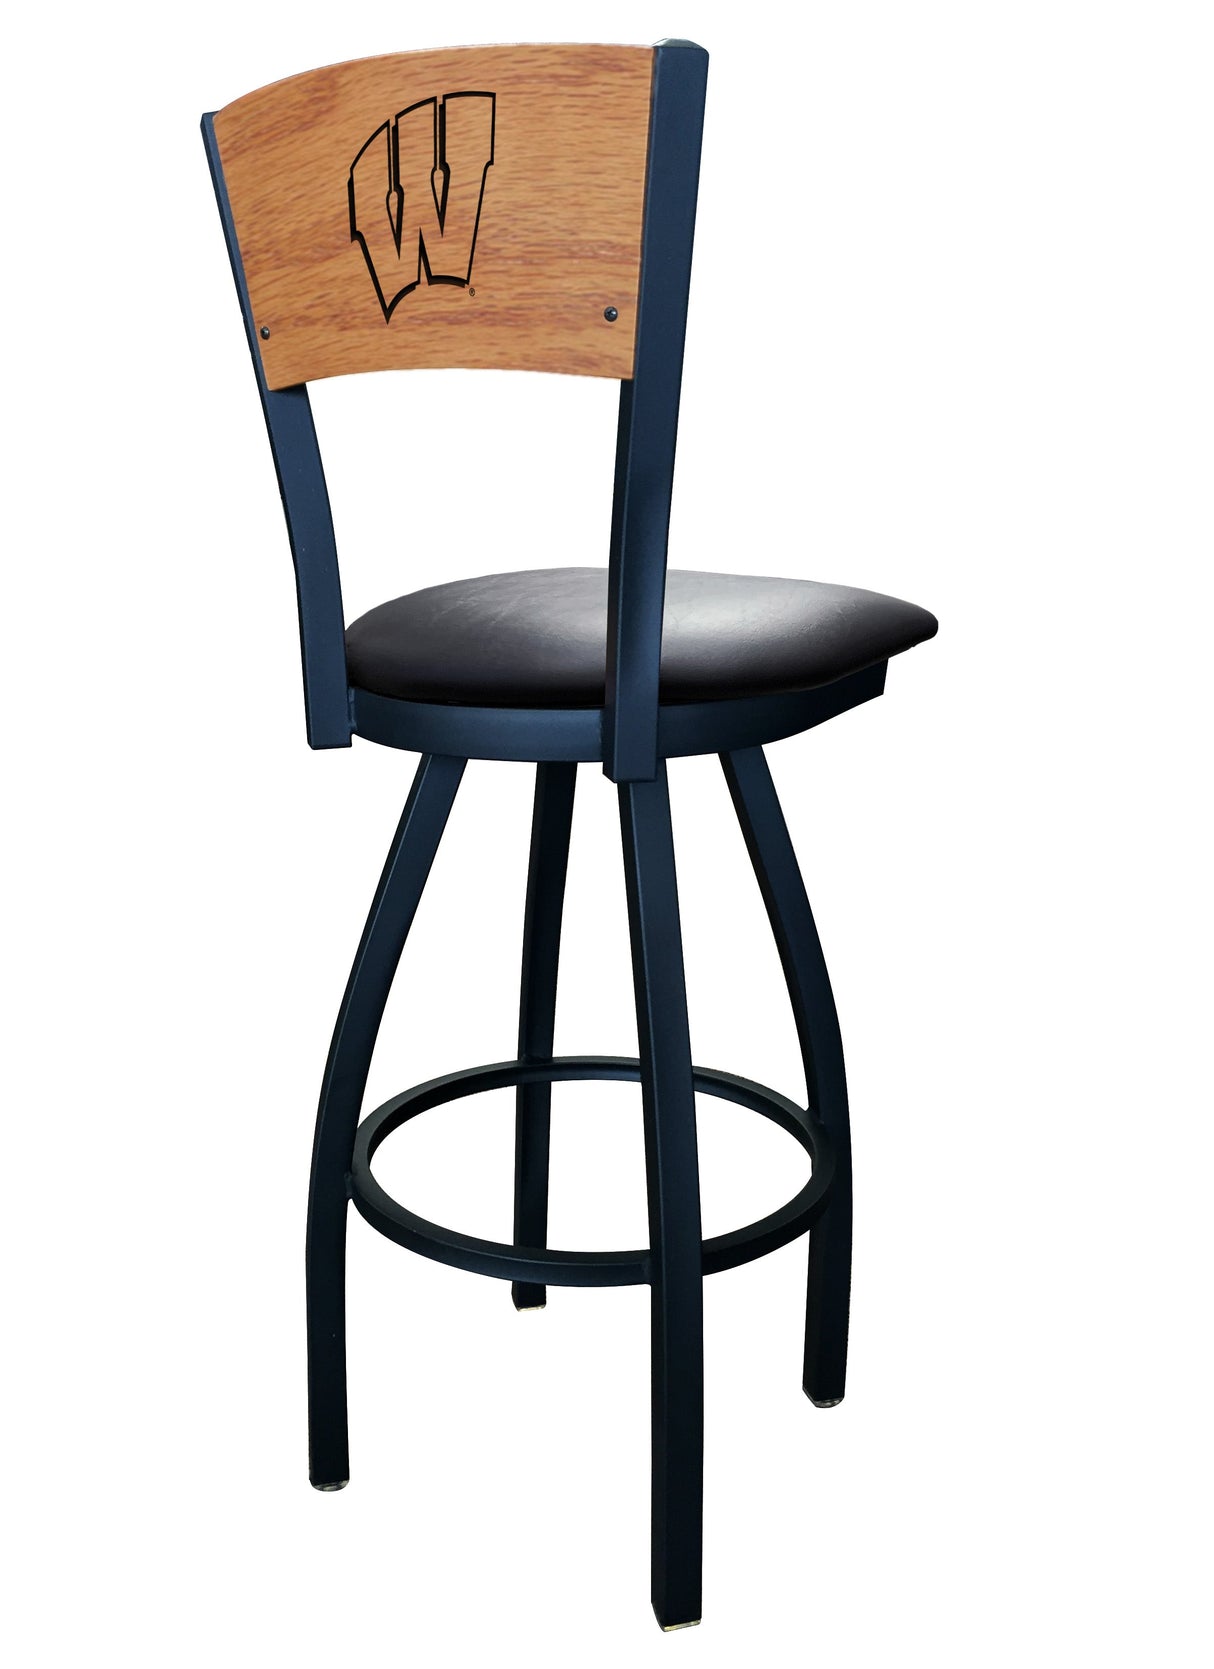 University of Wisconsin Badgers Script W L038 Laser Engraved Bar Stool by Holland Bar Stool